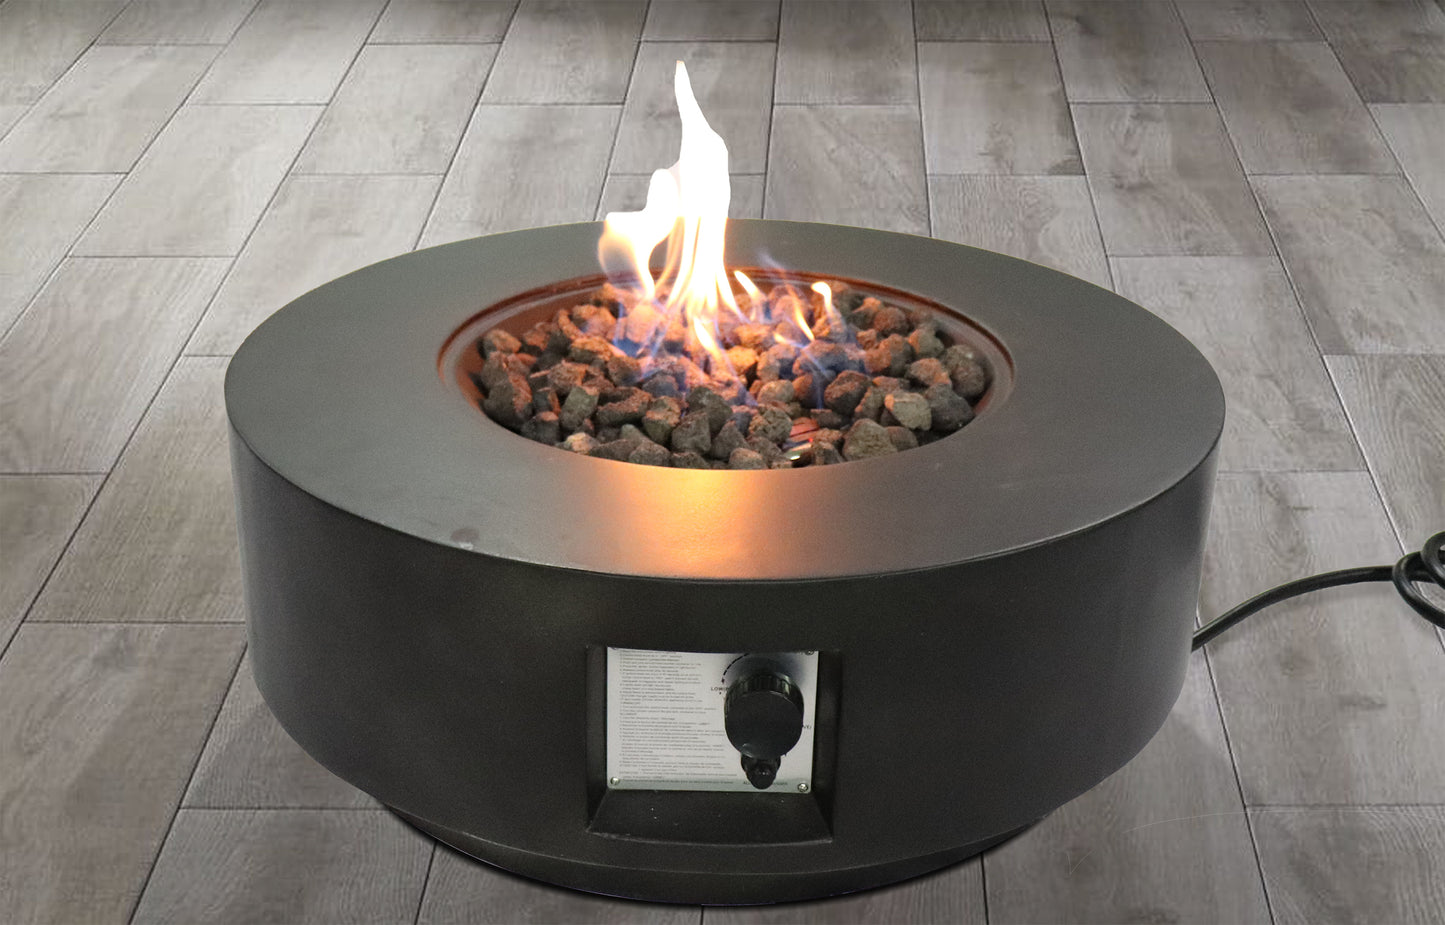 Living Source International 11 H x 30 W Round Concrete Gas Fire Pit Table with Lid (Charcoal)